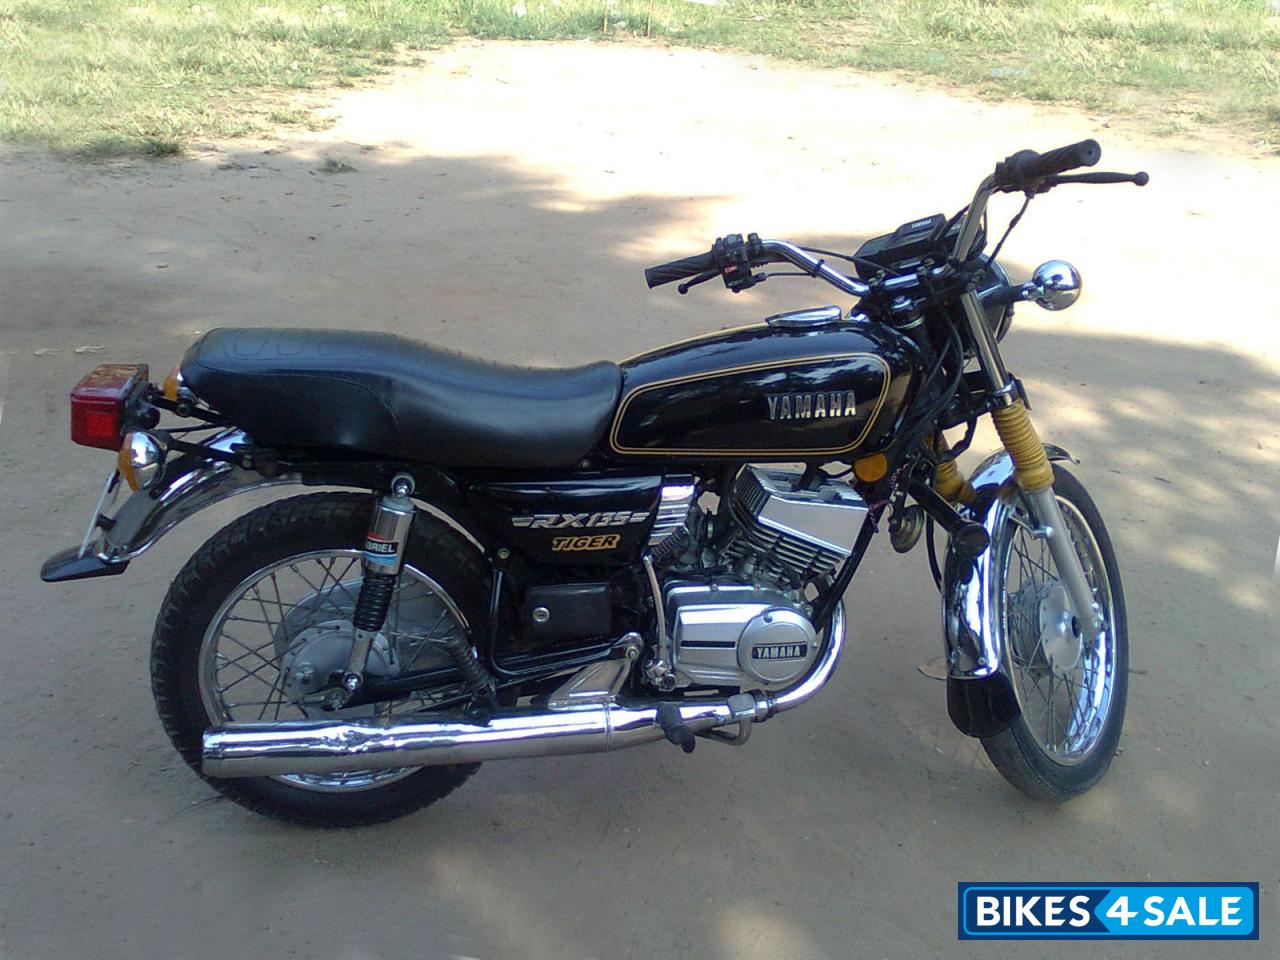 Used 1988 model Yamaha RX 135 for sale in Ernakulam. ID ...